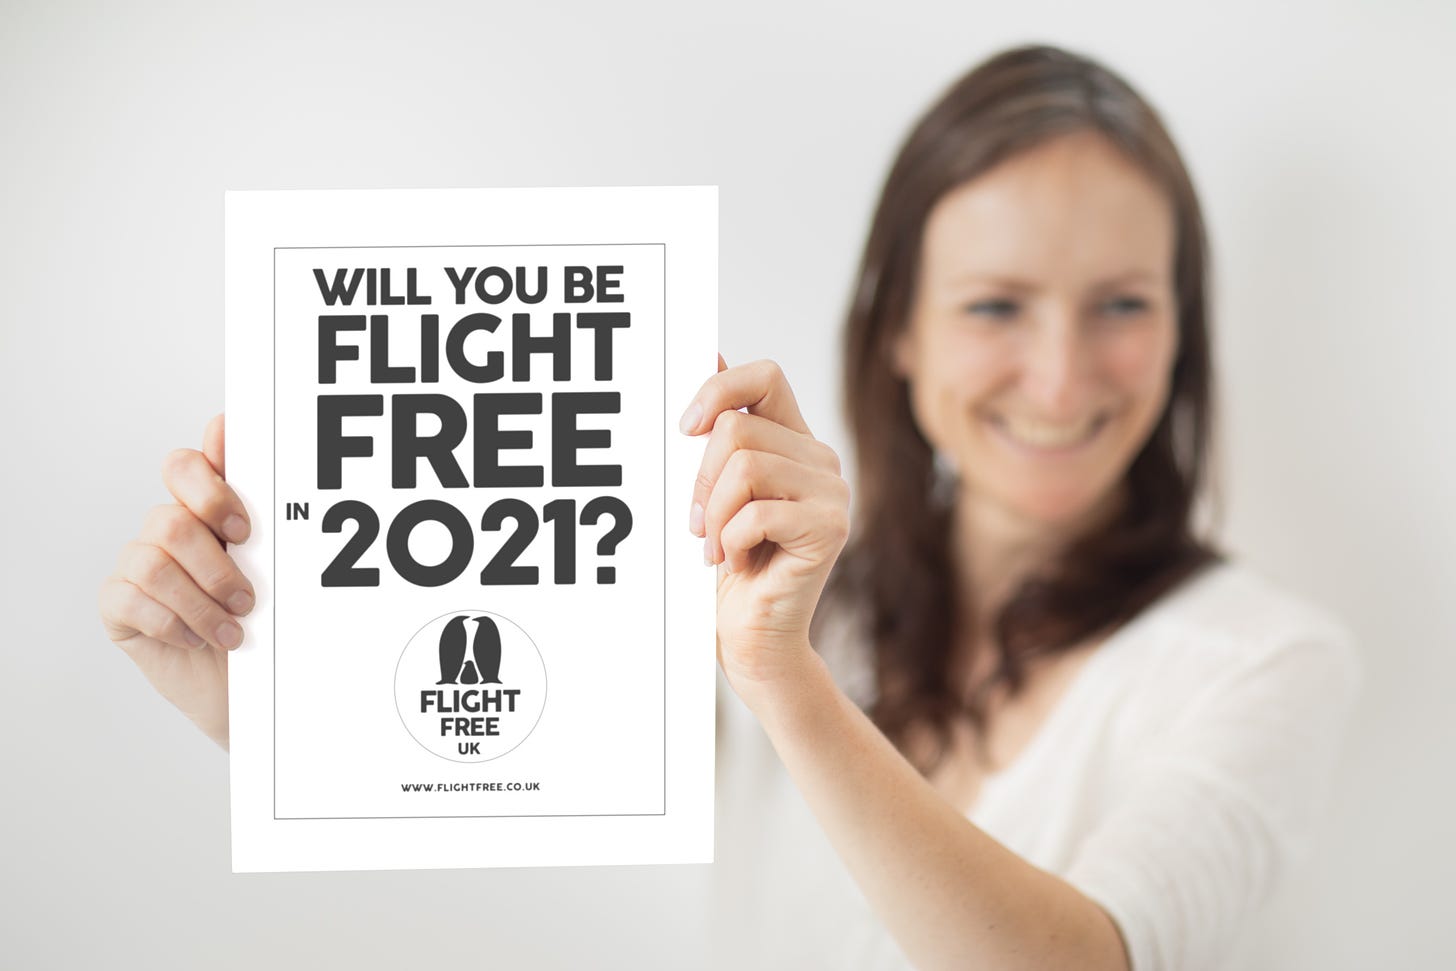 A smiling woman holds a sign that says 'Will you be flight free in 2021?'